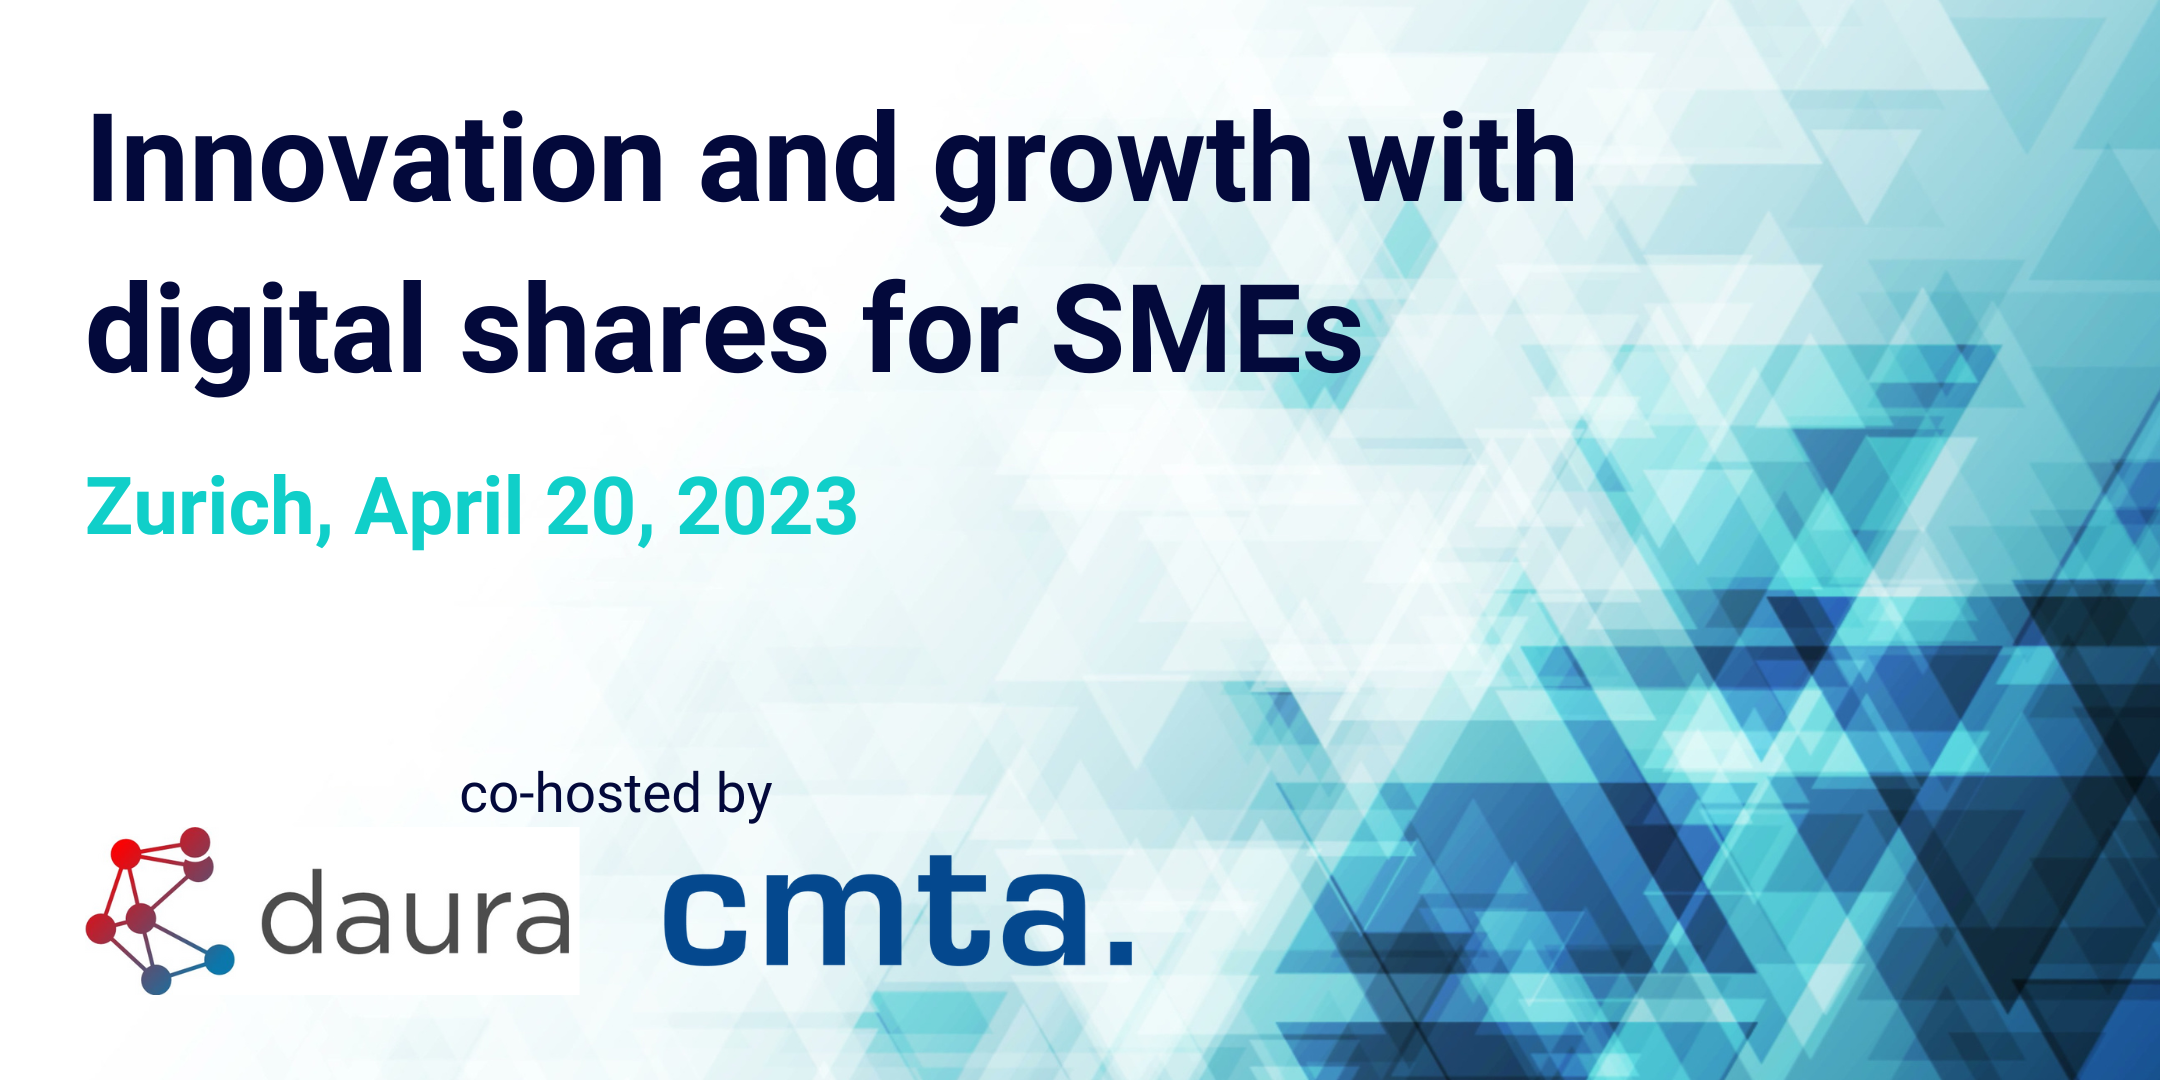 CMTA - Event: Innovation and growth with digital shares for SMEs